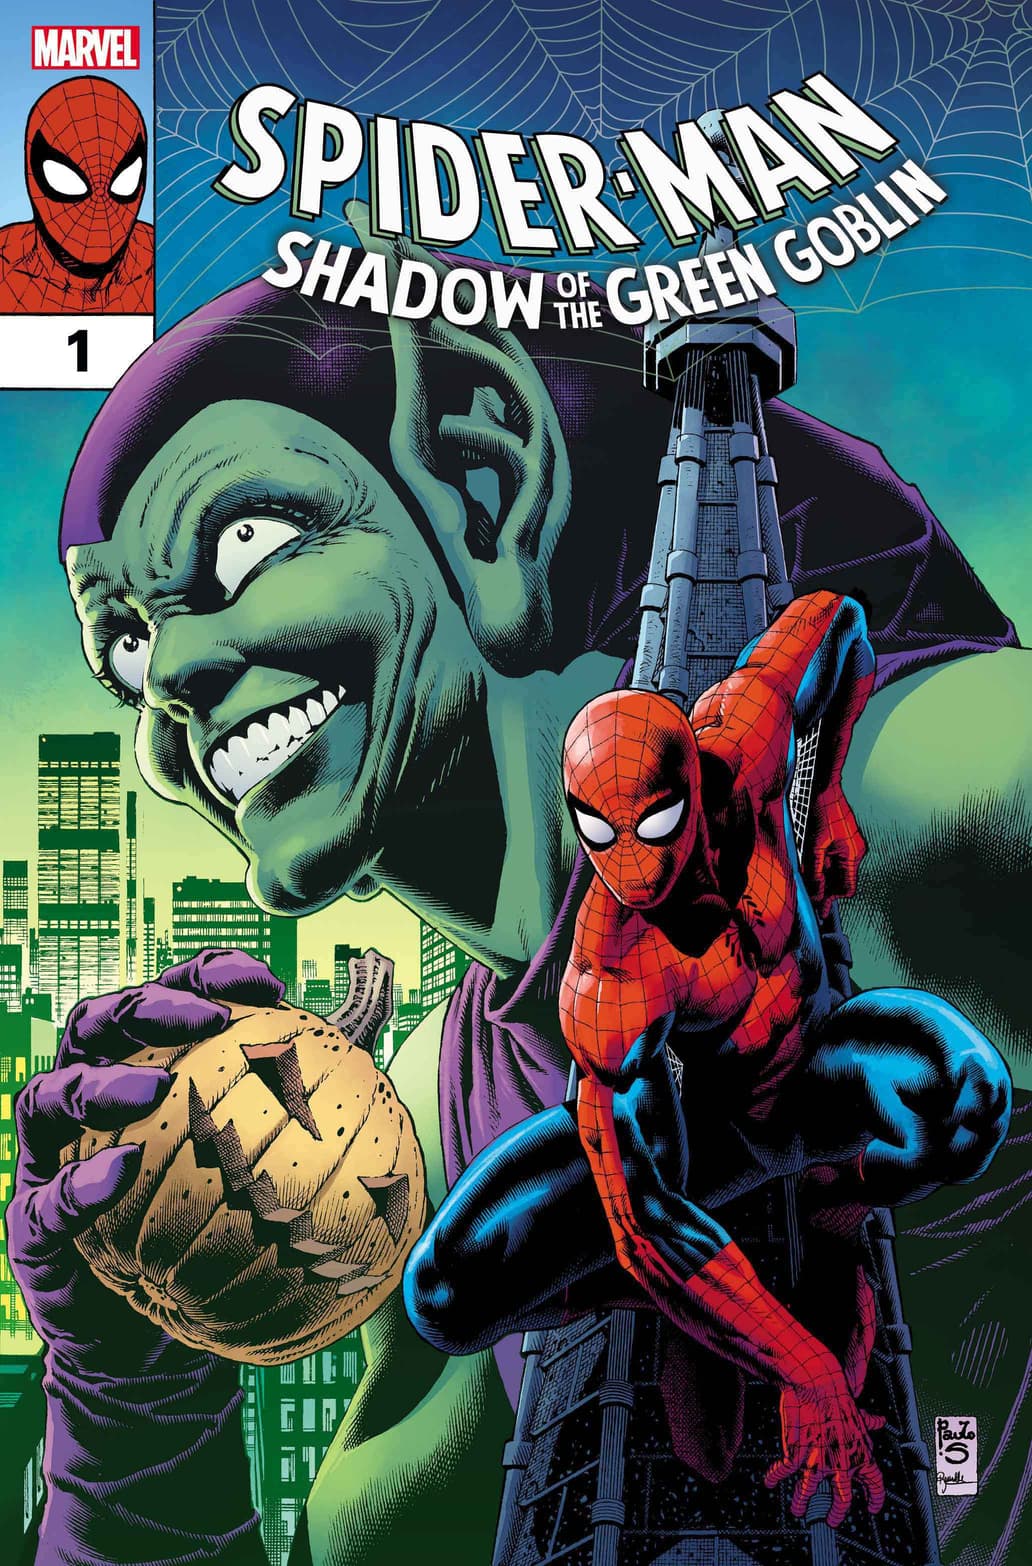 SPIDER-MAN: SHADOW OF THE GREEN GOBLIN #1 cover by Paulo Siqueira